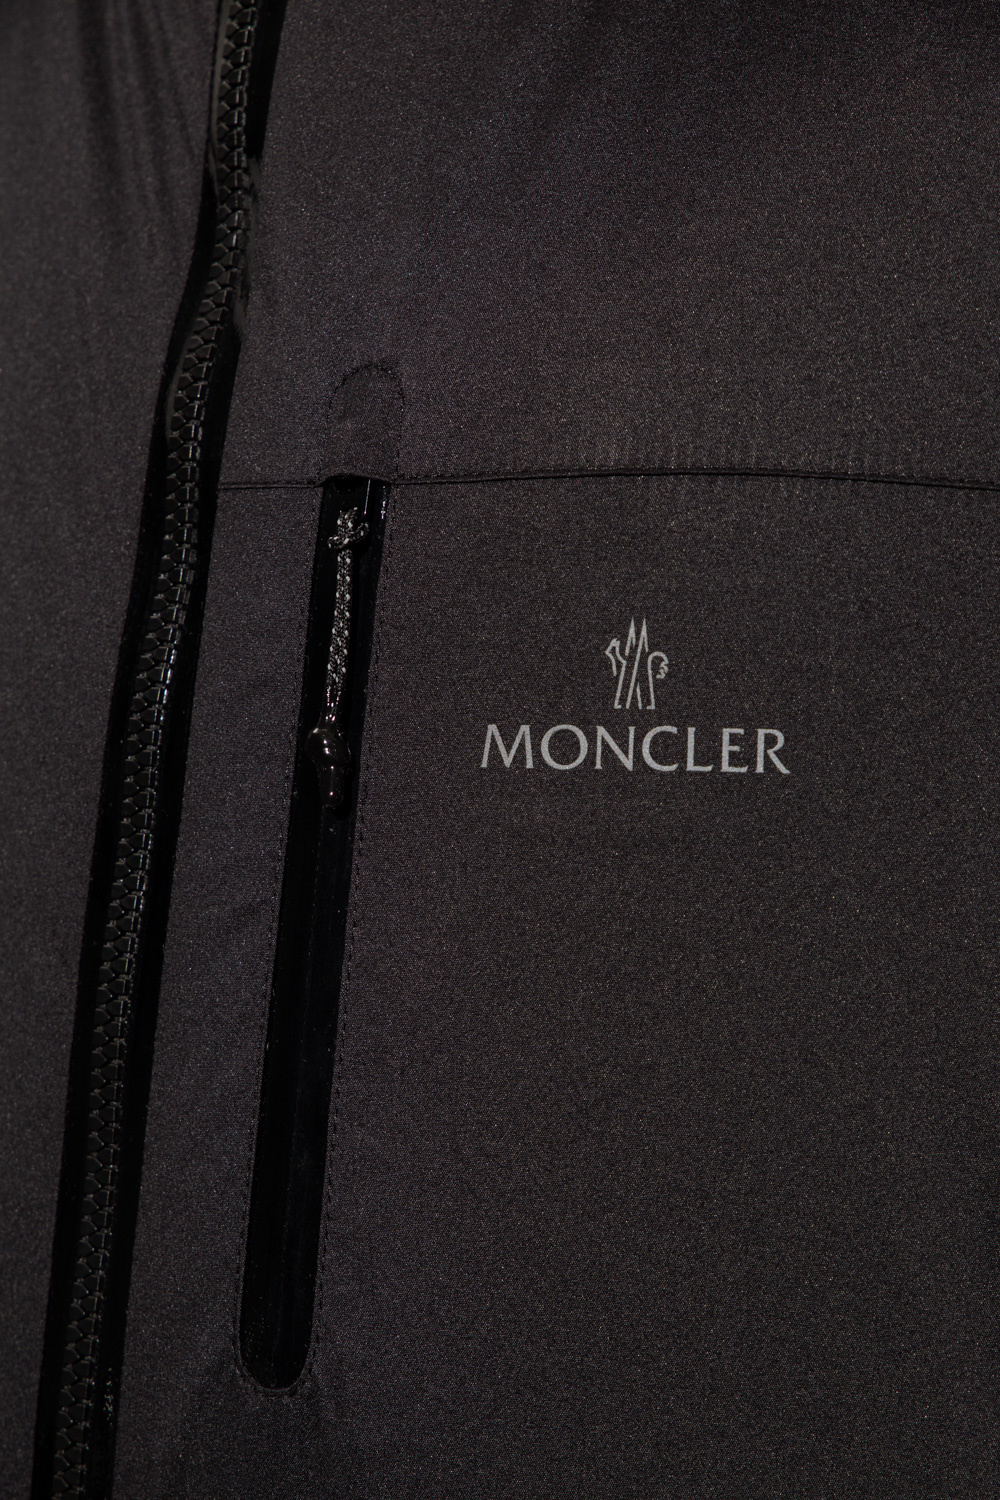 Moncler Folding taps with brief shirt holder